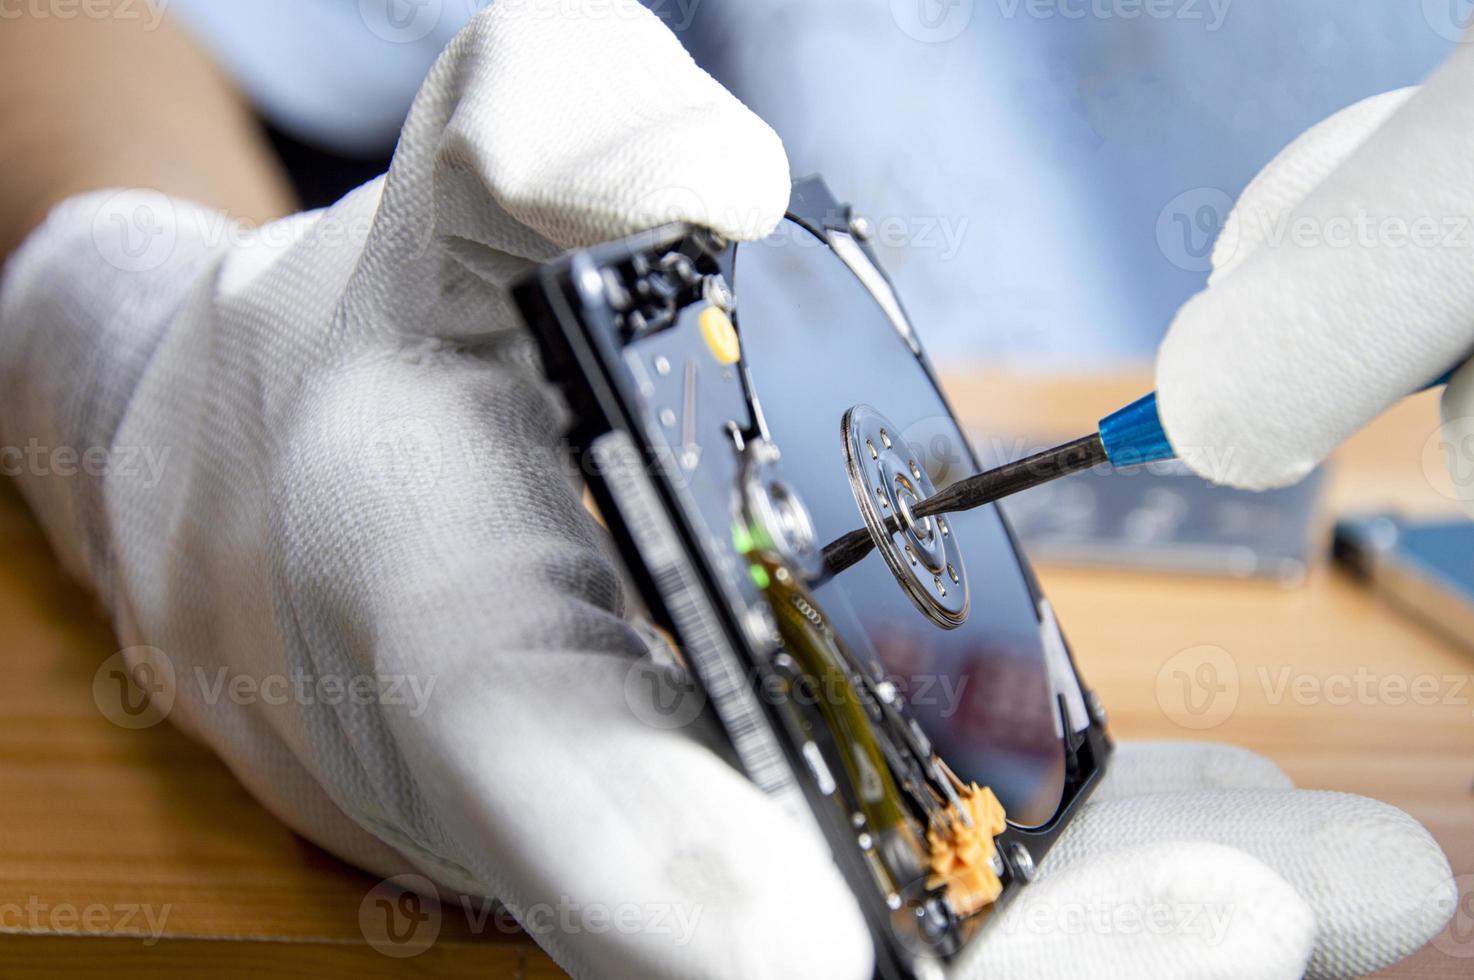 mechanic repairing hard drive, hard drive It is a device for storing data. photo